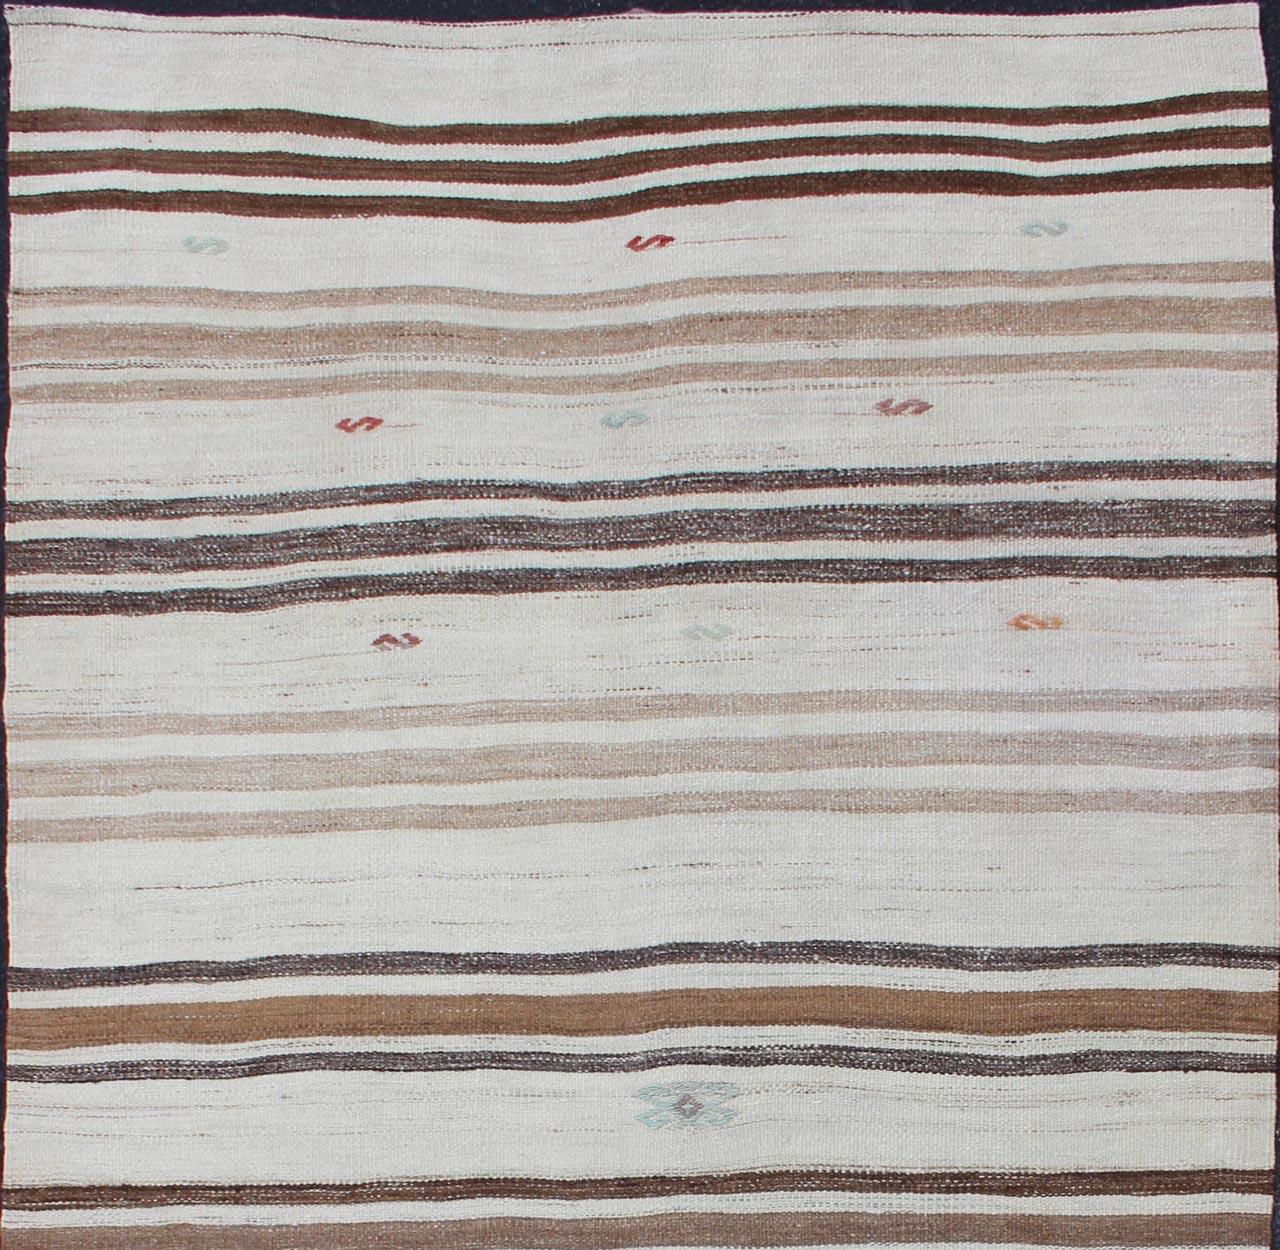 Ivory and brown vintage Kilim from Turkey with Minimalist design in stripes, rug EN-176194, country of origin / type: Turkey / Kilim, circa 1950

This vintage striped design Kilim from Turkey rendered in shade of brown's, taupe's and ivory